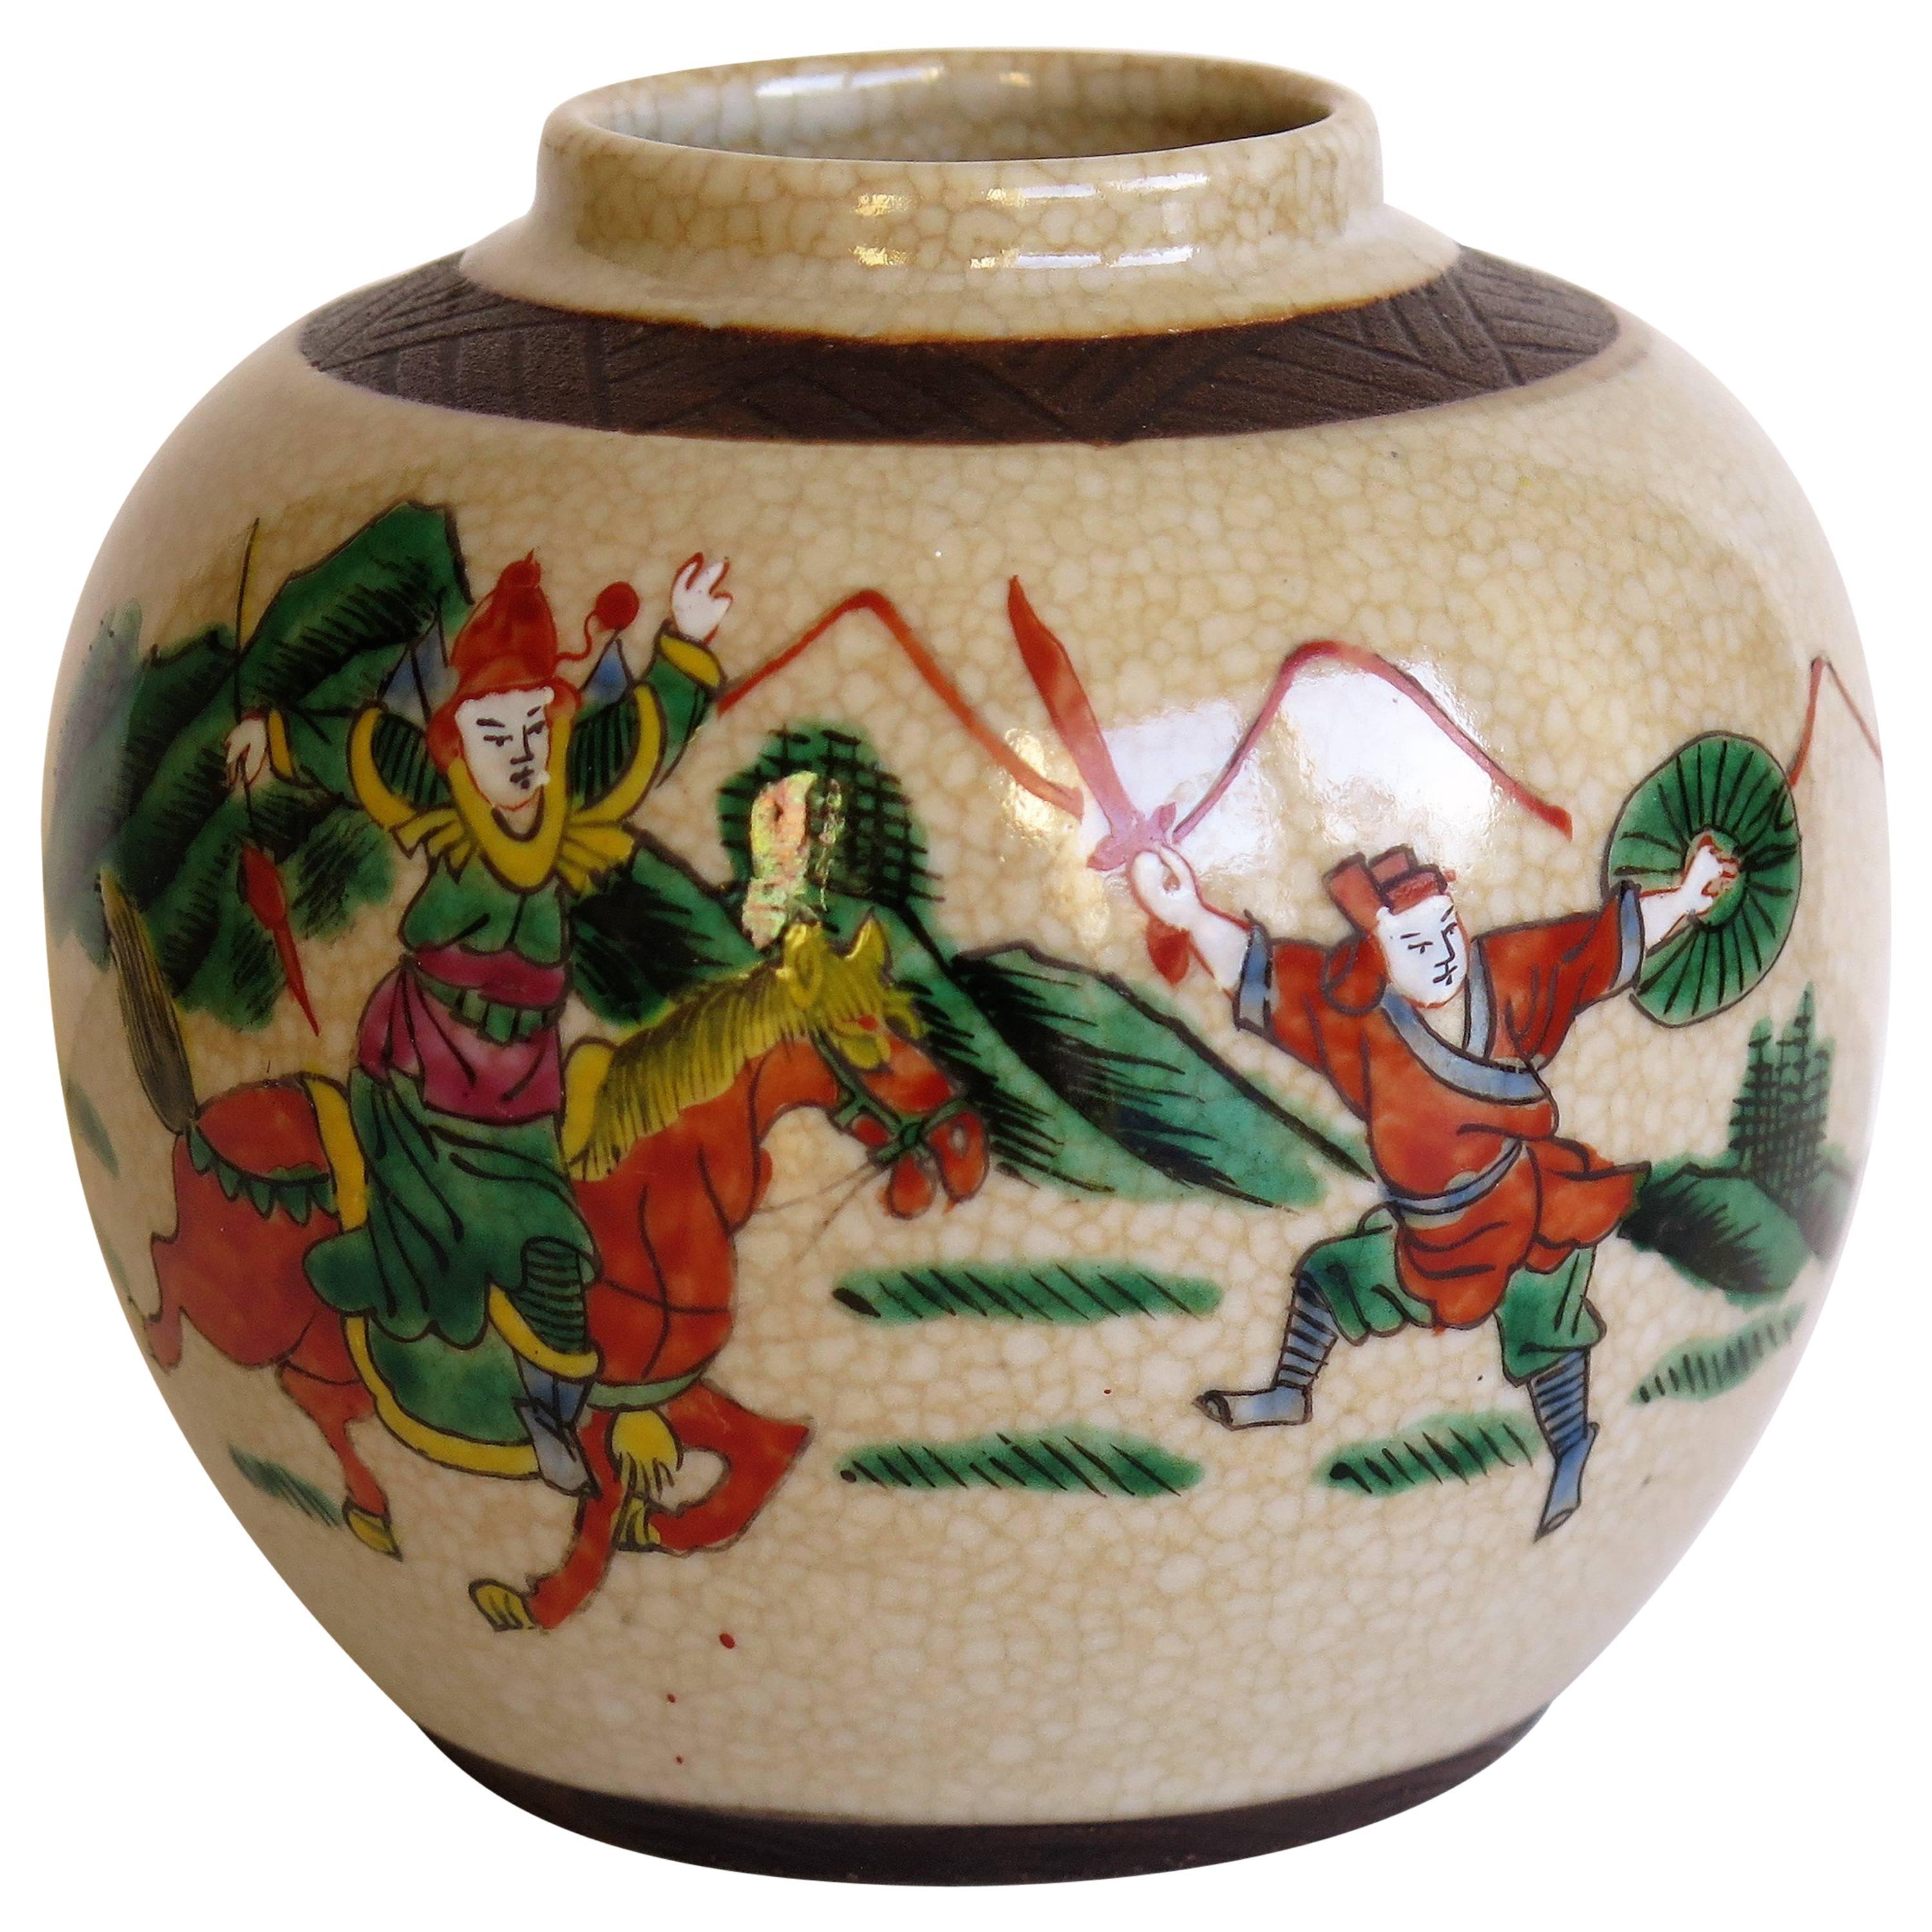 Chinese Export Ceramic Jar Crackle Glaze Hand-Painted Warrior Scene, Late Qing